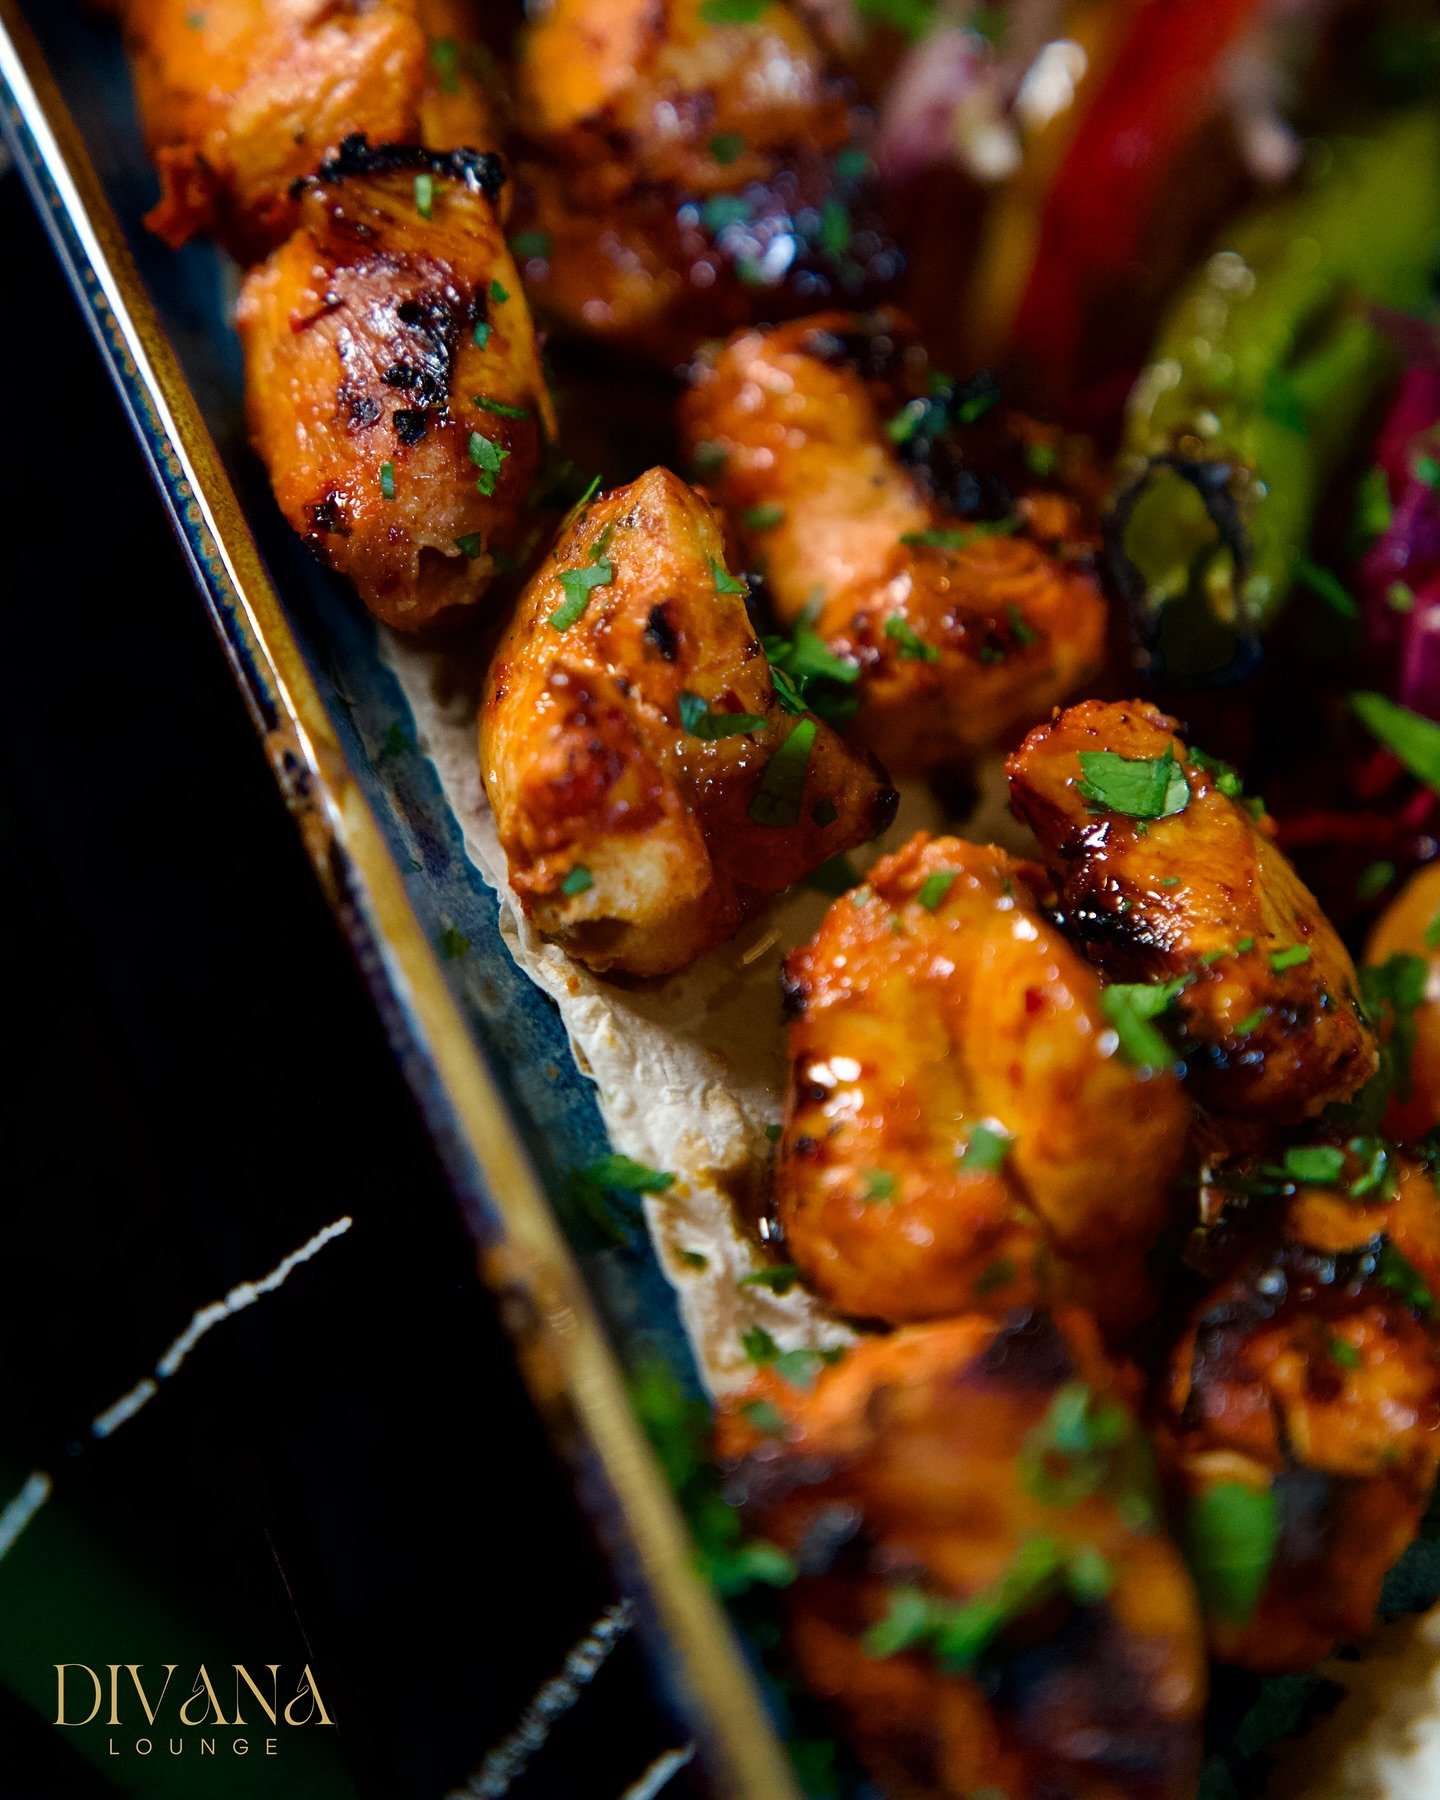 Grilled Chicken shish &amp; shisha? The best way to start your week! 👀

What better way to start your week than by enjoying the delicious tastes of the Mediterranean paired with the perfect blend of shisha flavours? 😋

Walk-ins available | Call: 07